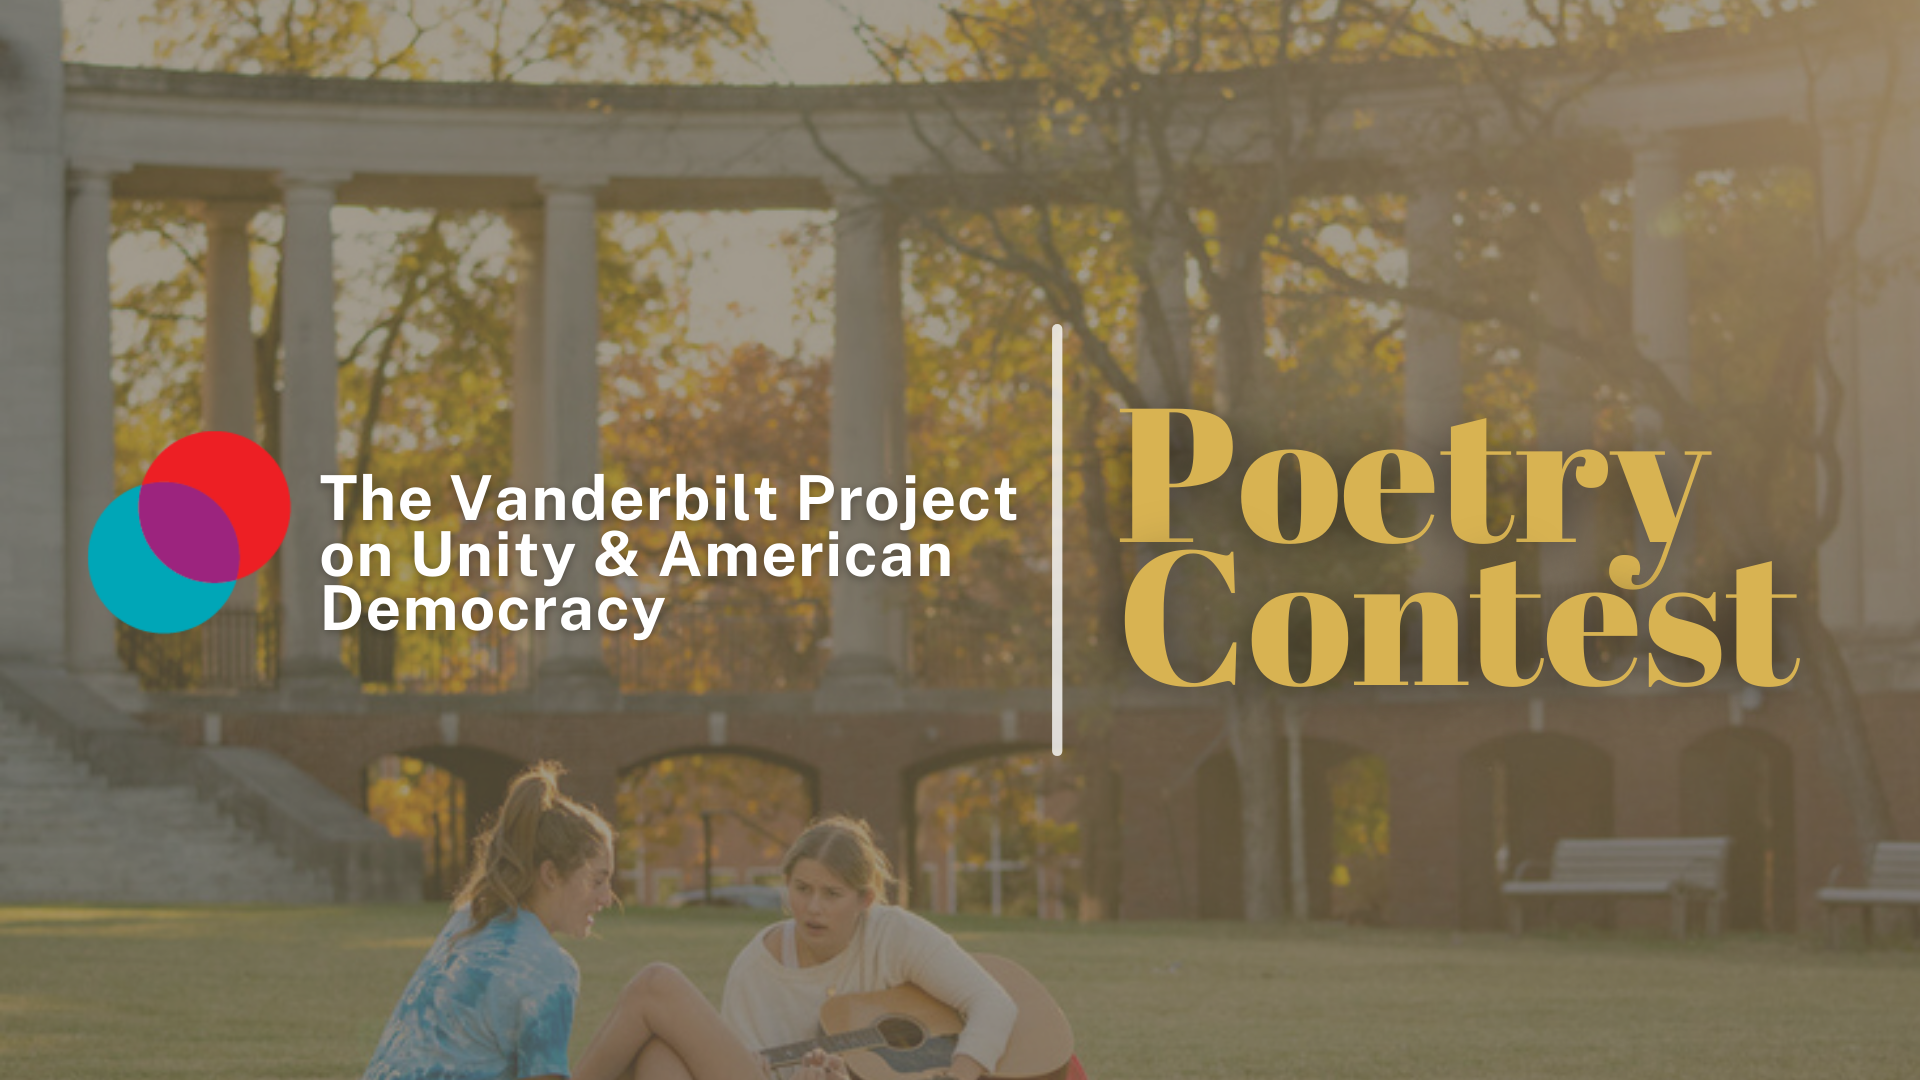 Vanderbilt Project on Unity and American Democracy’s 2023 poetry contest open for submissions